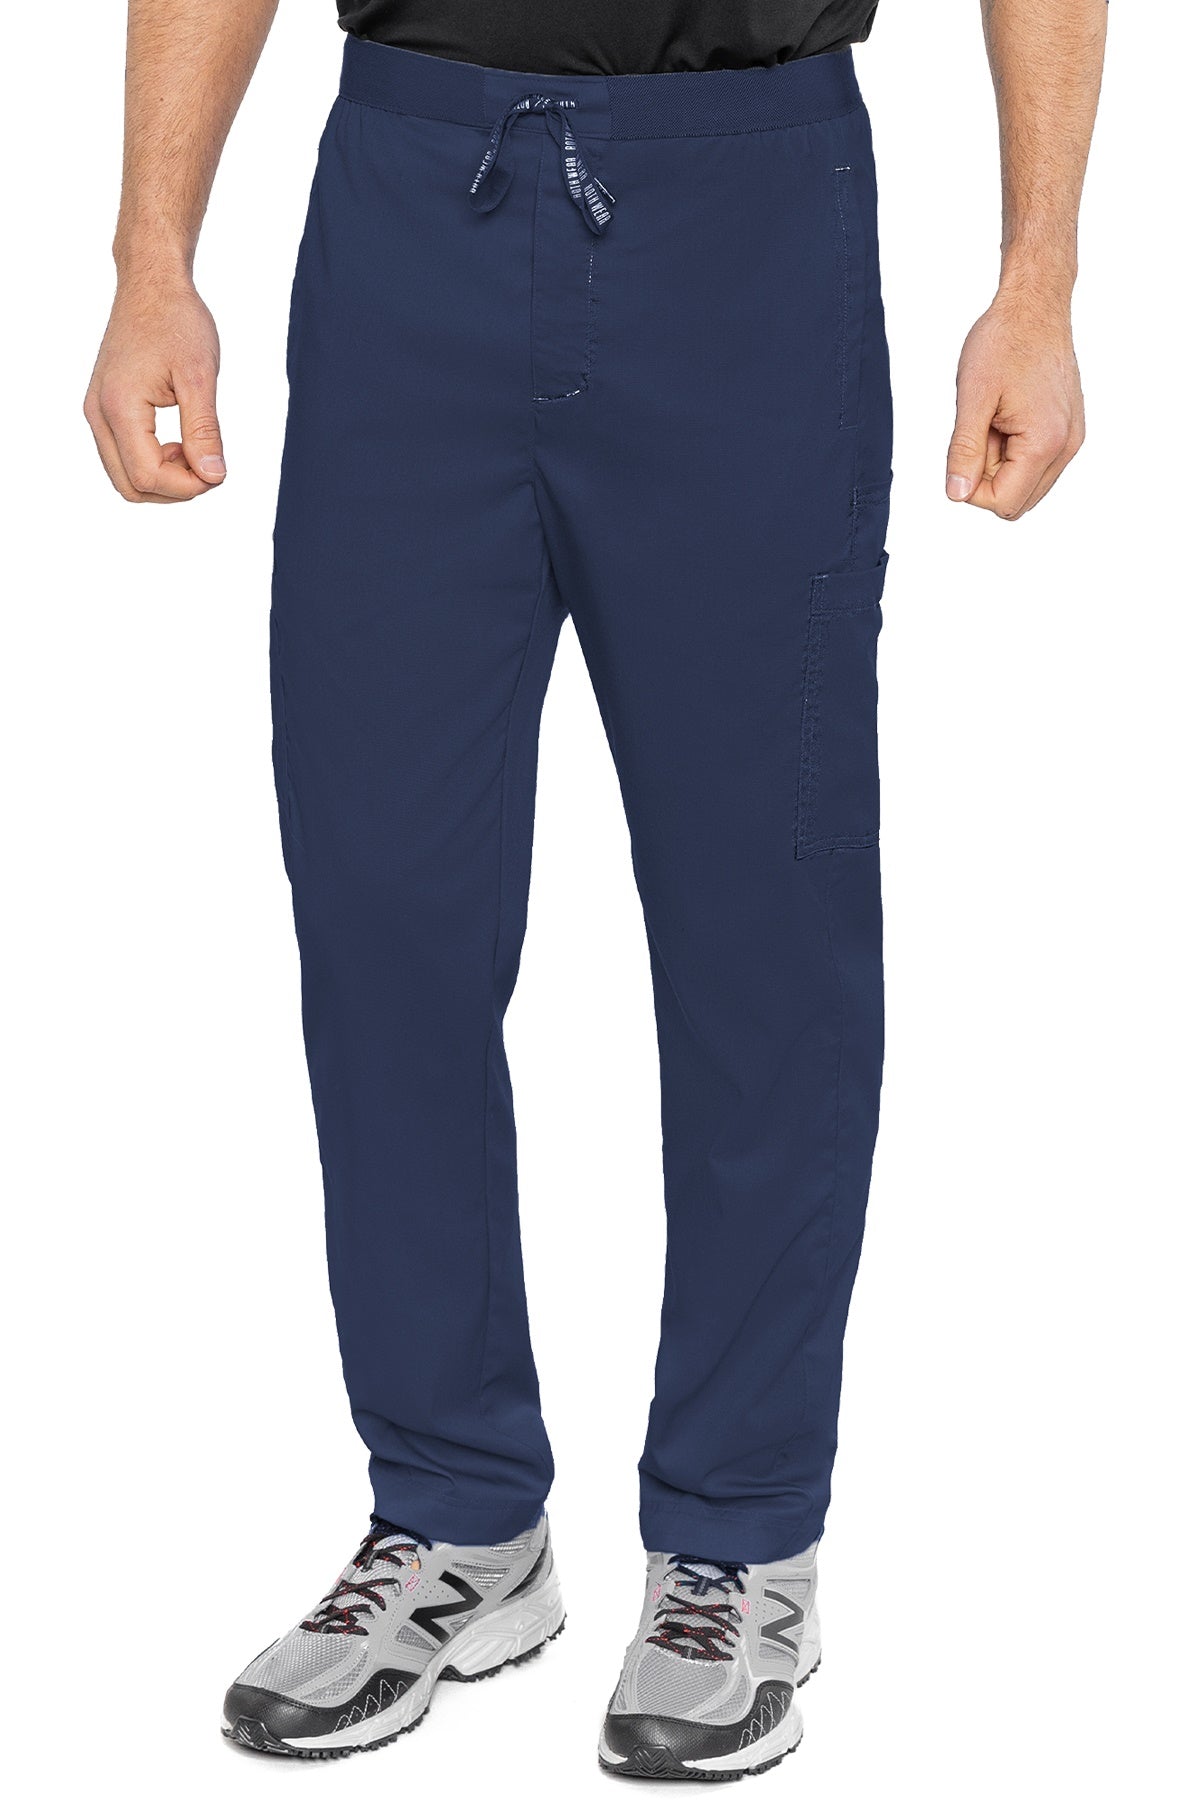 Med Couture Mens Scrub Pants RothWear Hutton Straight Leg in Navy at Parker's Clothing and Shoes.